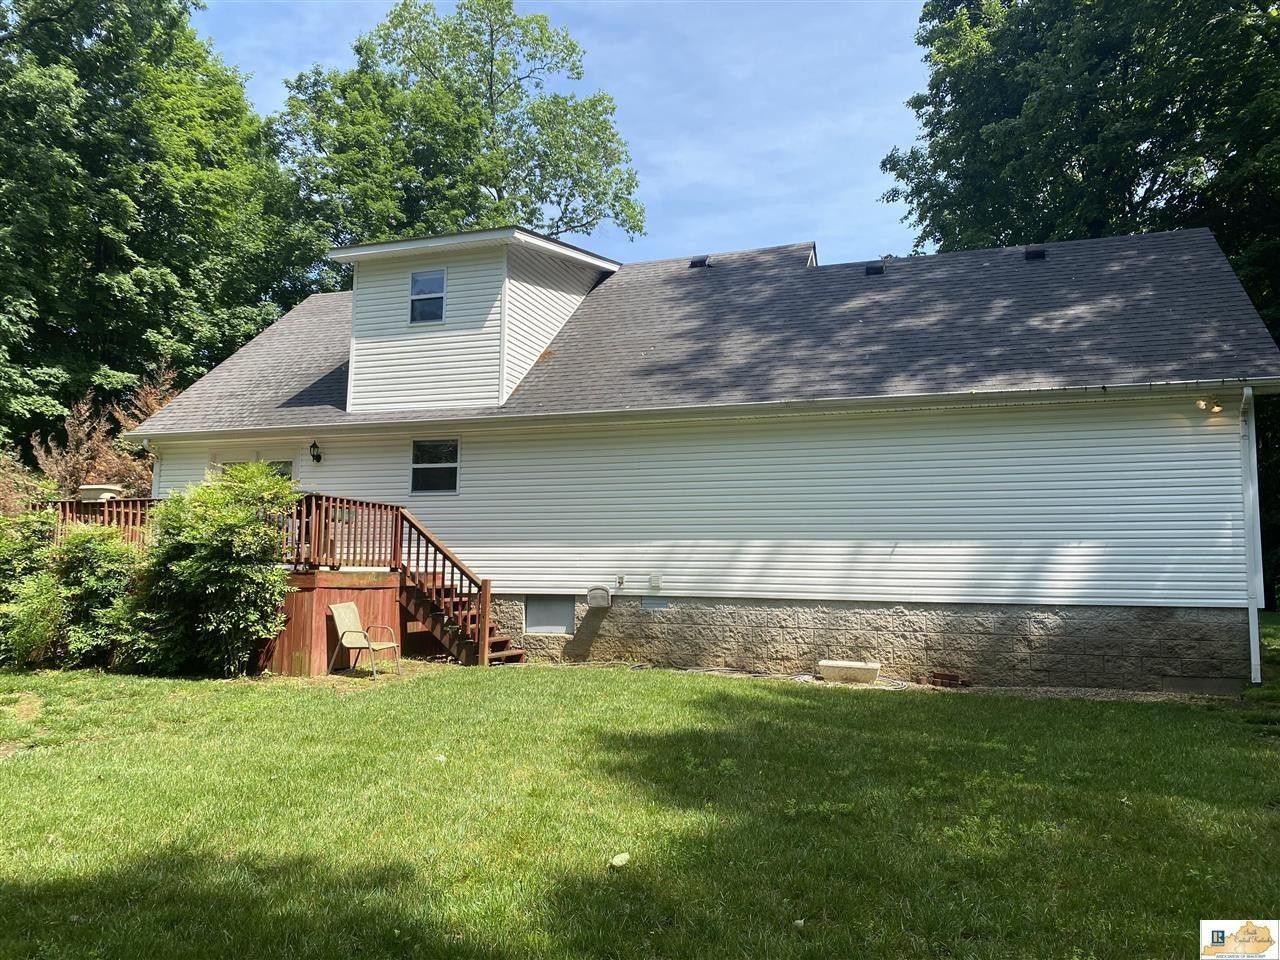 22. 450 Colonial Heights Road